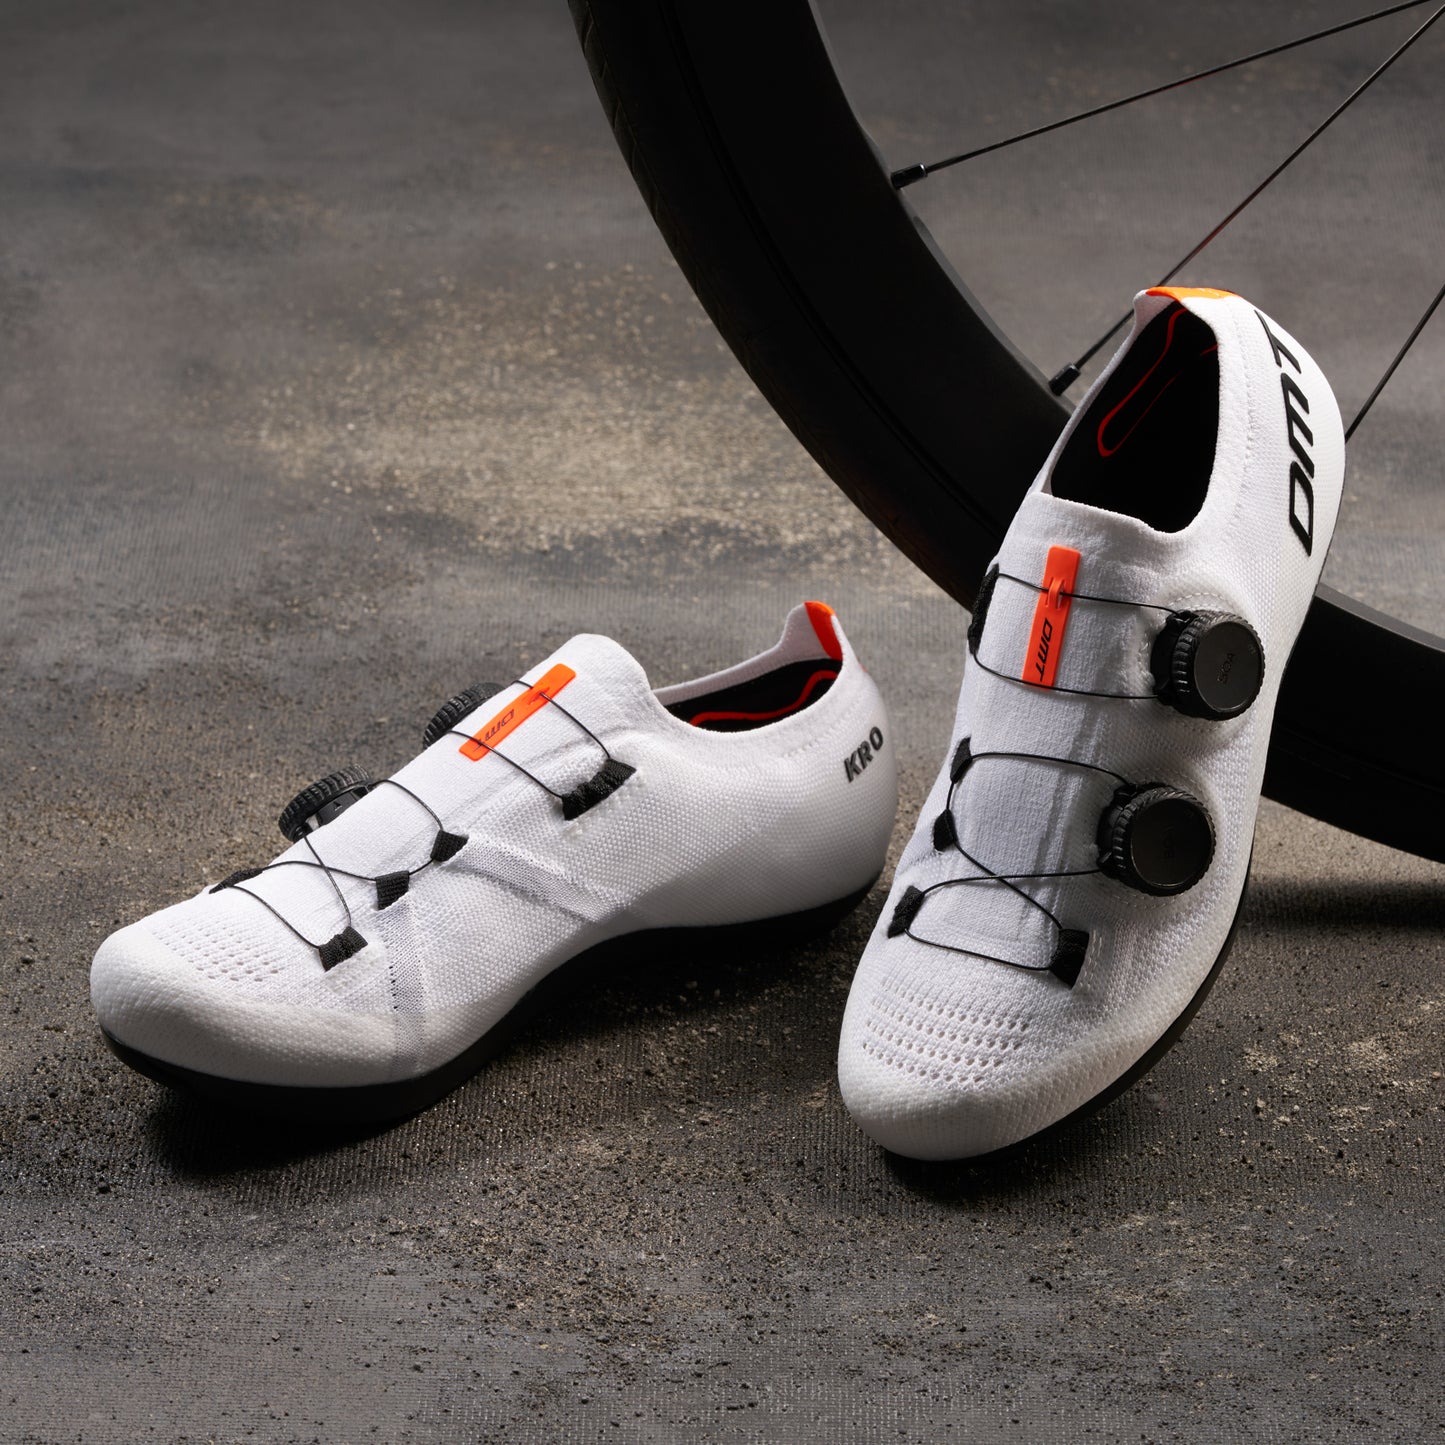 dmt cycling shoes online